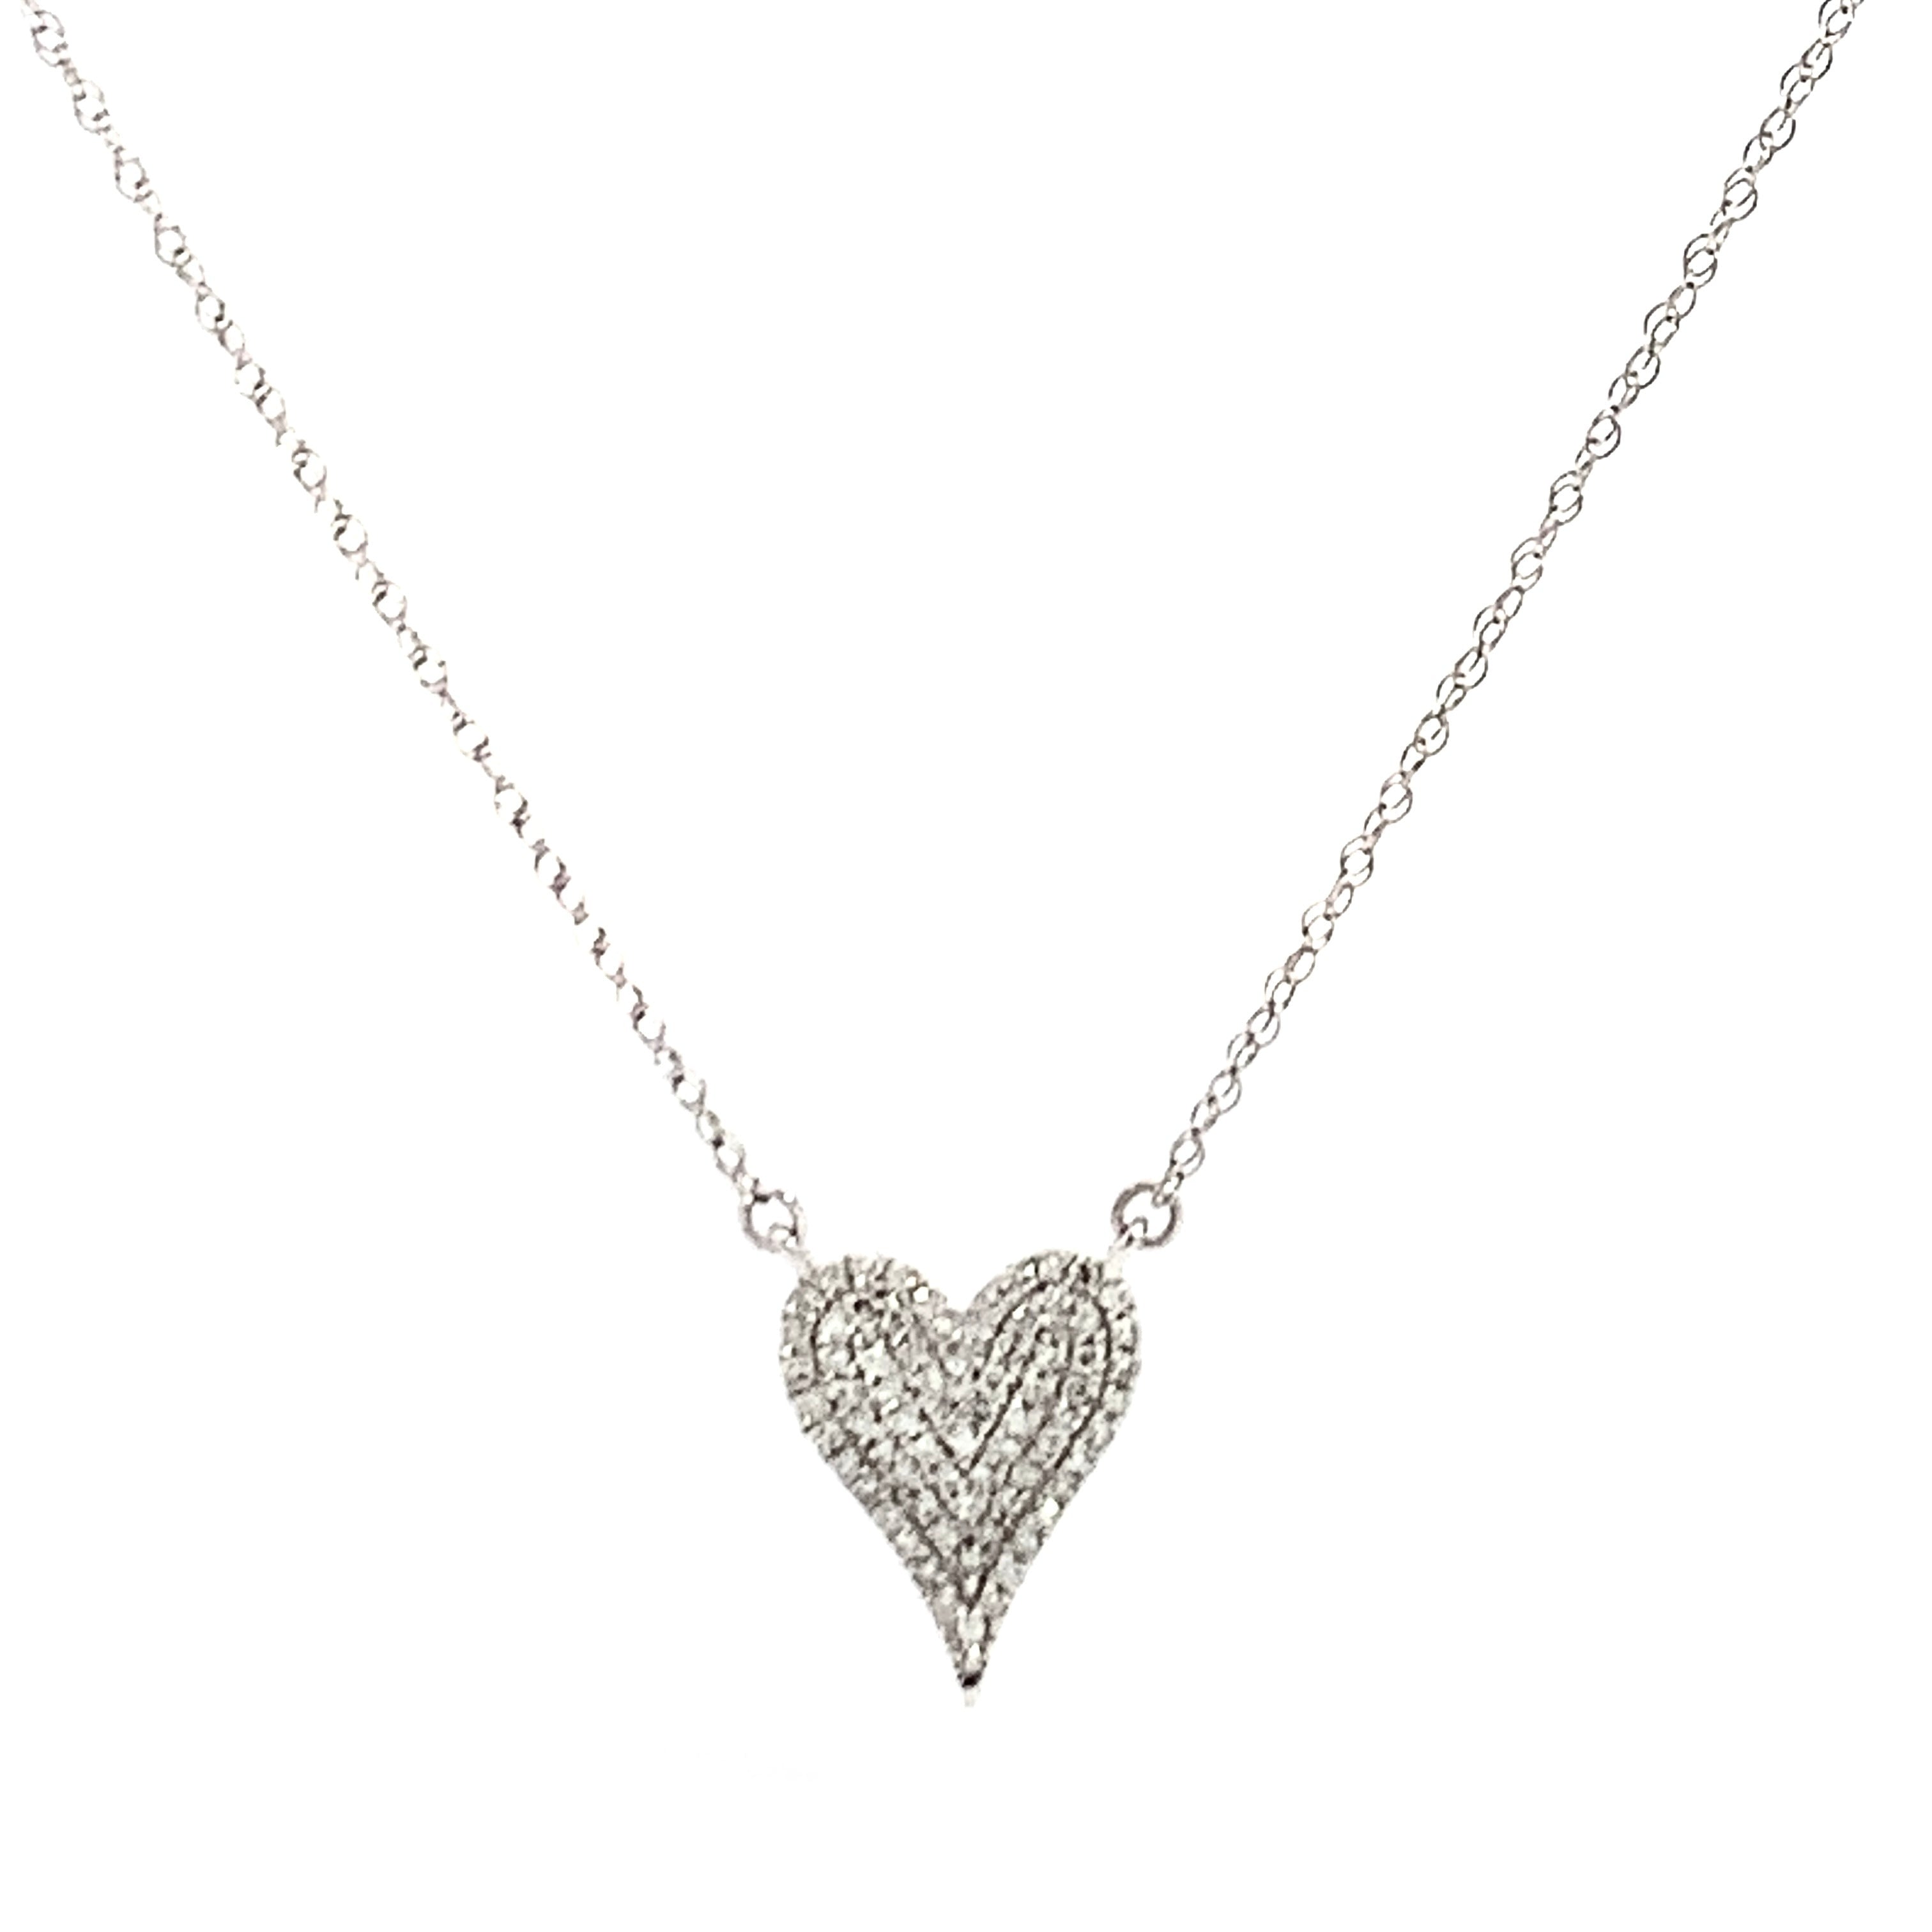 The Pave Heart Necklace- 50% OFF!